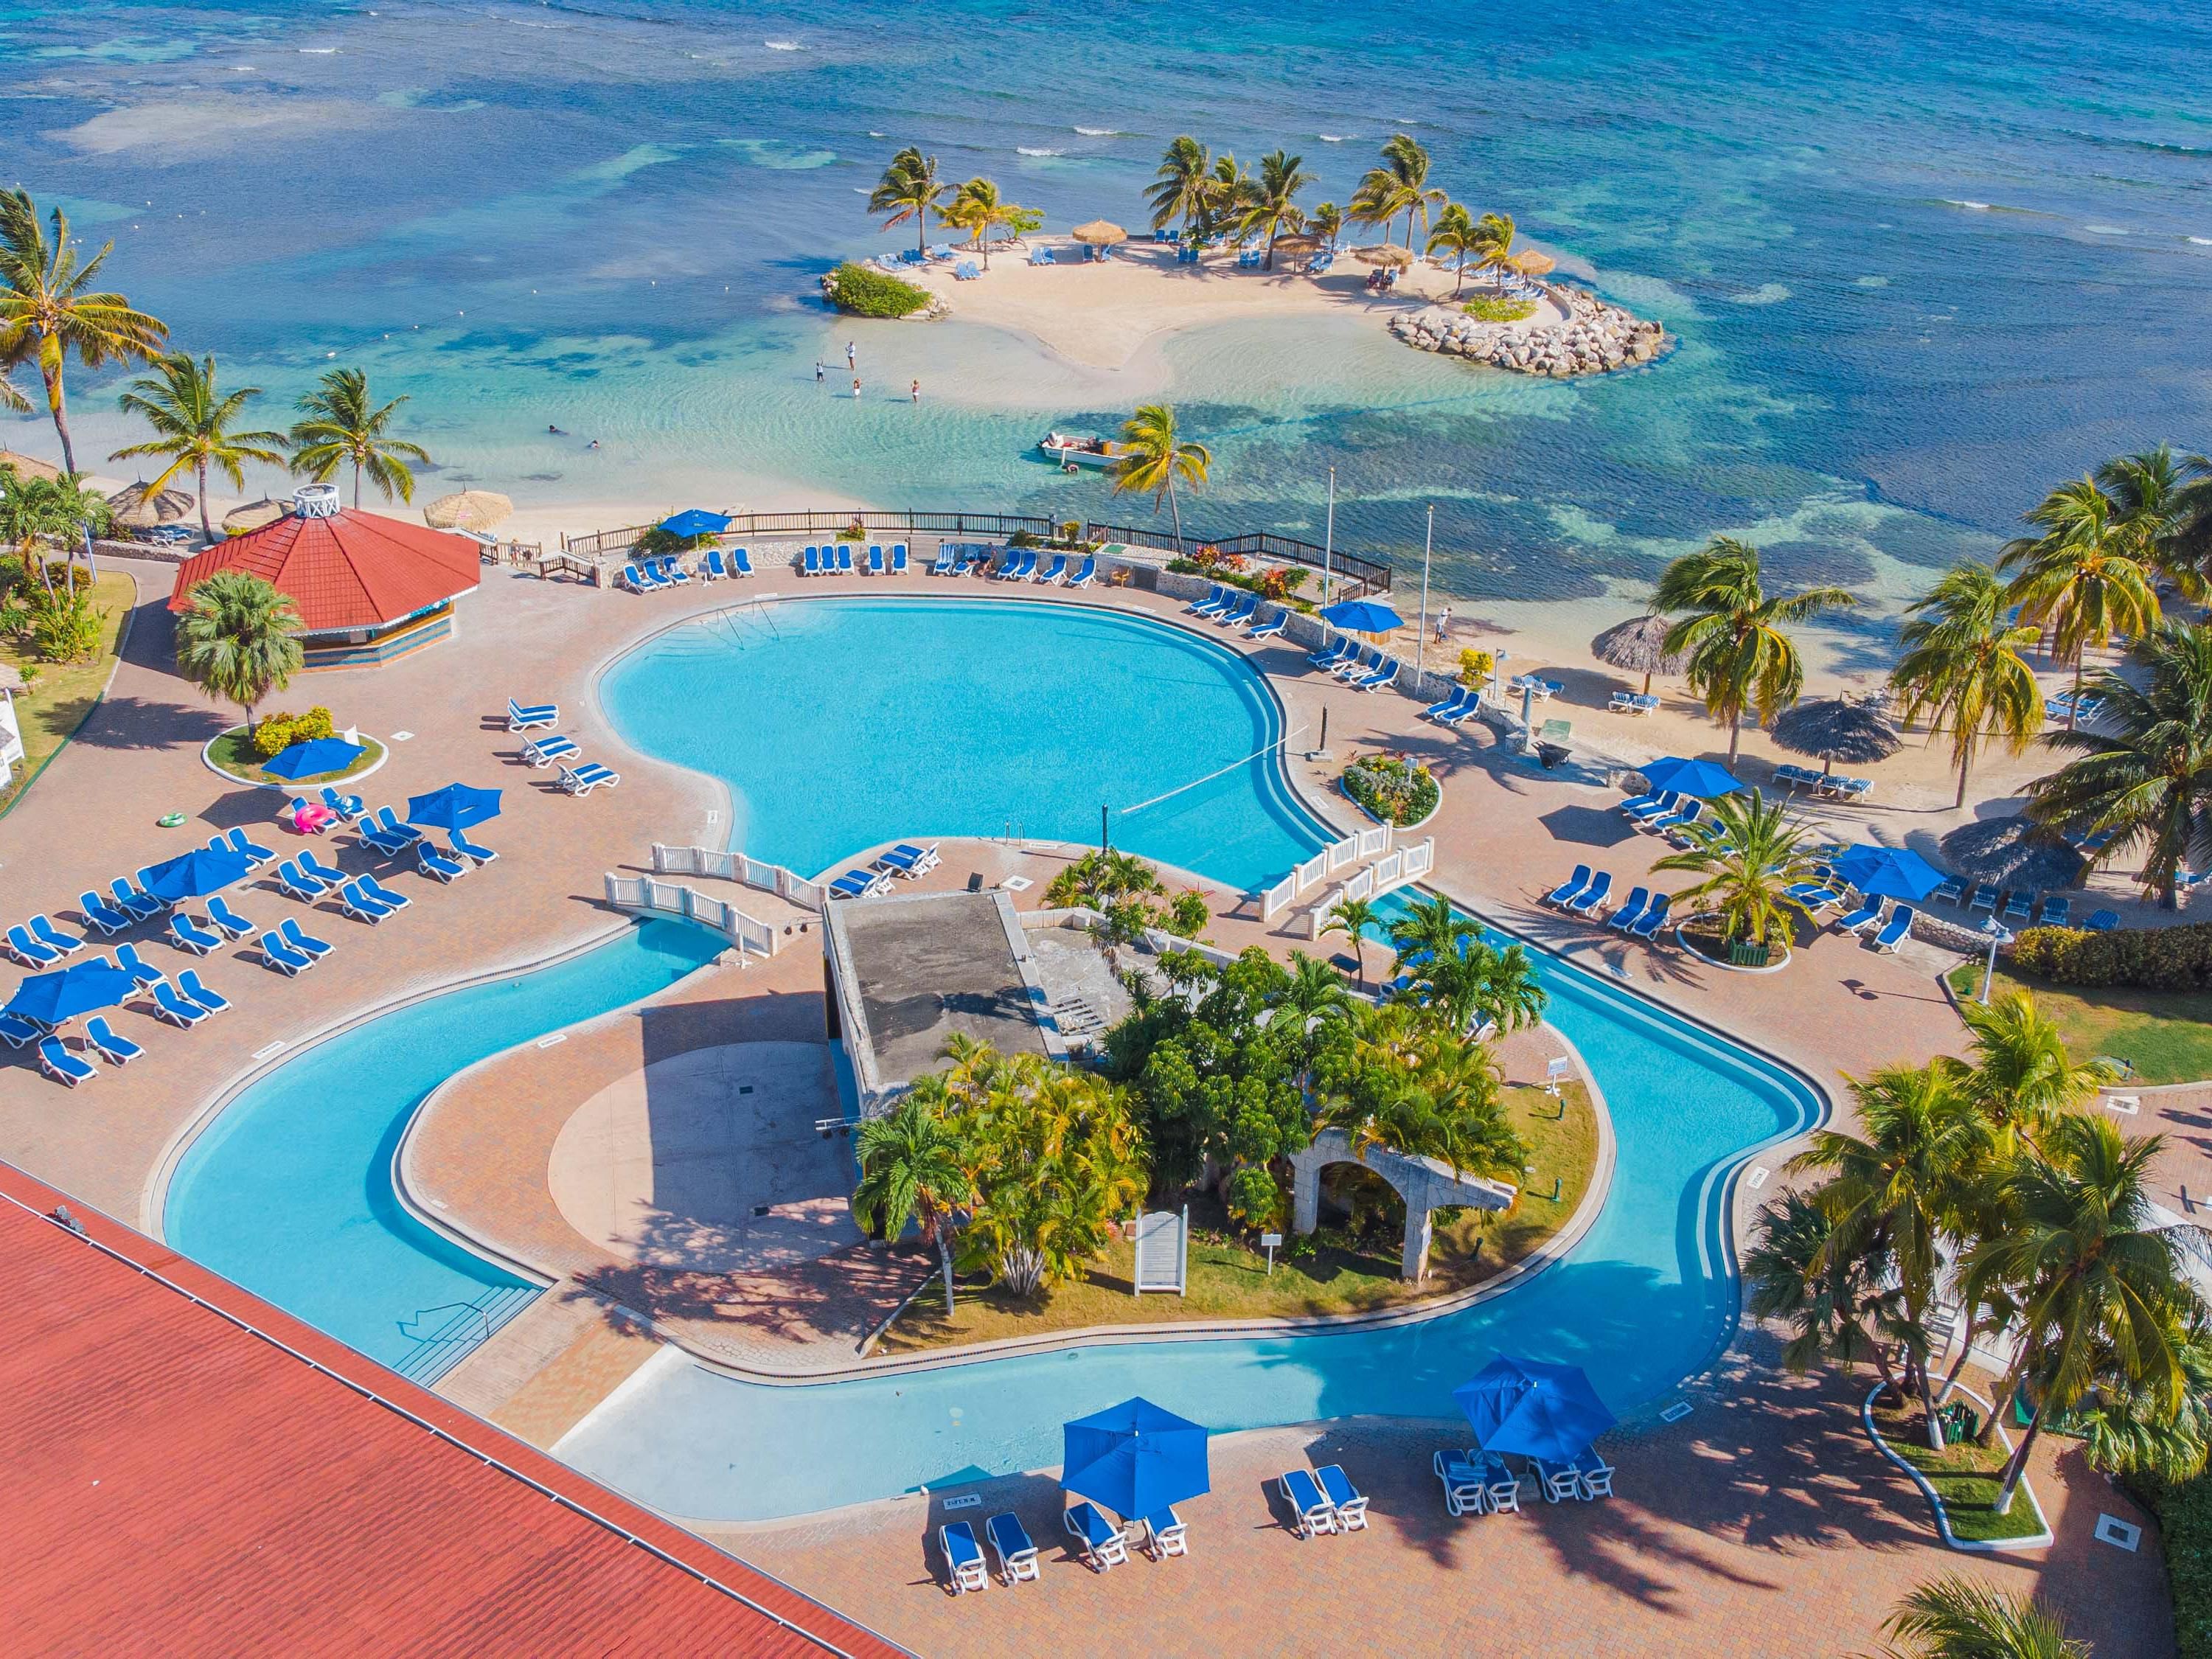 Aerial view of resort pool and beach in Montego Bay